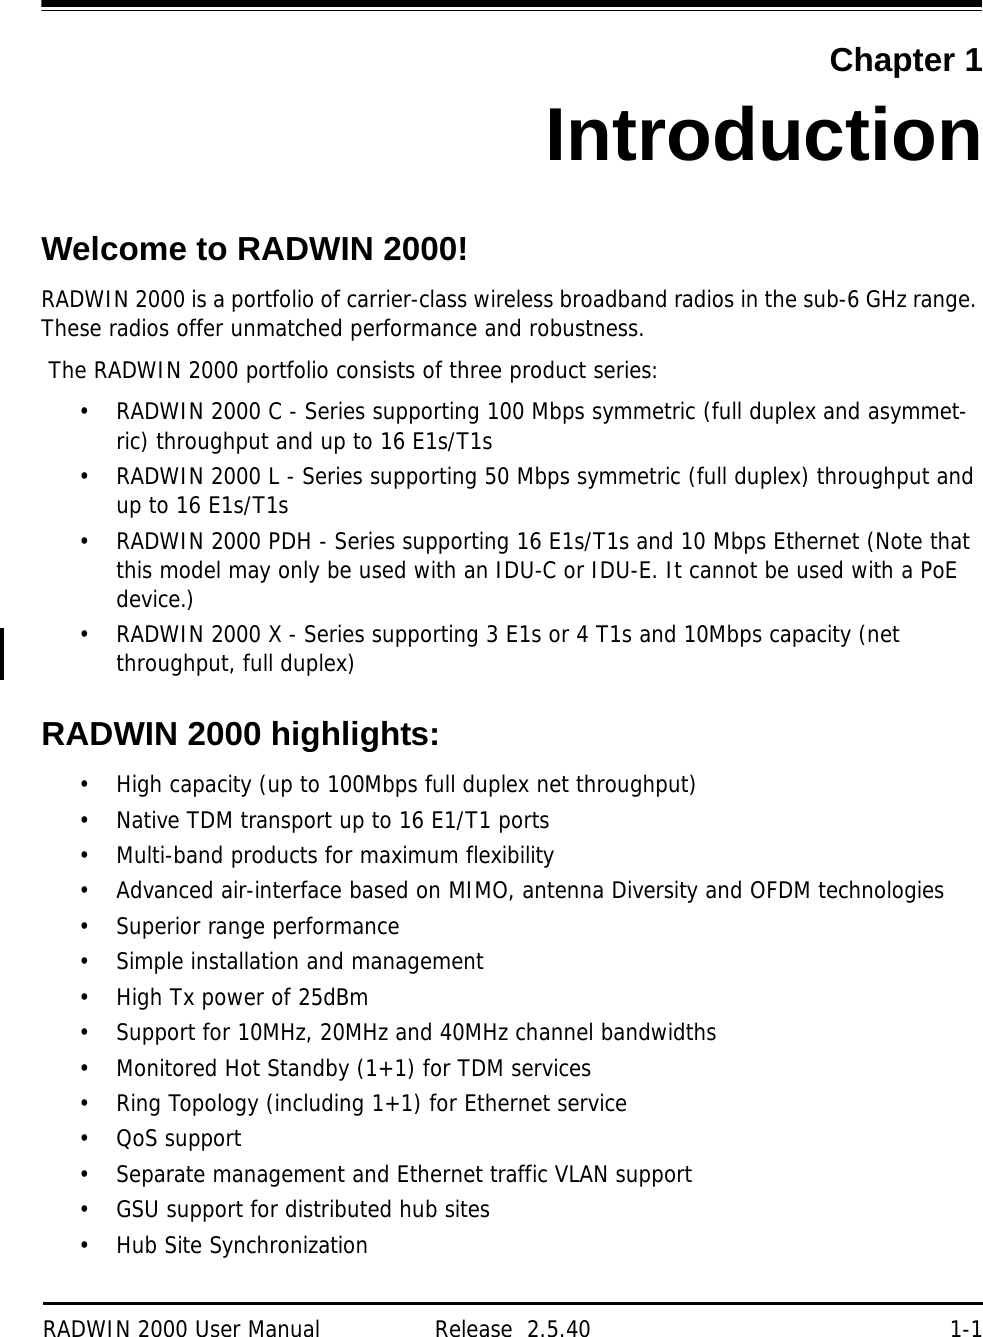 RADWIN 2000 User Manual Release  2.5.40 1-1Chapter 1IntroductionWelcome to RADWIN 2000!RADWIN 2000 is a portfolio of carrier-class wireless broadband radios in the sub-6 GHz range. These radios offer unmatched performance and robustness.  The RADWIN 2000 portfolio consists of three product series:• RADWIN 2000 C - Series supporting 100 Mbps symmetric (full duplex and asymmet-ric) throughput and up to 16 E1s/T1s• RADWIN 2000 L - Series supporting 50 Mbps symmetric (full duplex) throughput and up to 16 E1s/T1s• RADWIN 2000 PDH - Series supporting 16 E1s/T1s and 10 Mbps Ethernet (Note that this model may only be used with an IDU-C or IDU-E. It cannot be used with a PoE device.)• RADWIN 2000 X - Series supporting 3 E1s or 4 T1s and 10Mbps capacity (net throughput, full duplex)RADWIN 2000 highlights:• High capacity (up to 100Mbps full duplex net throughput)• Native TDM transport up to 16 E1/T1 ports• Multi-band products for maximum flexibility• Advanced air-interface based on MIMO, antenna Diversity and OFDM technologies• Superior range performance• Simple installation and management• High Tx power of 25dBm• Support for 10MHz, 20MHz and 40MHz channel bandwidths• Monitored Hot Standby (1+1) for TDM services• Ring Topology (including 1+1) for Ethernet service• QoS support• Separate management and Ethernet traffic VLAN support• GSU support for distributed hub sites• Hub Site Synchronization